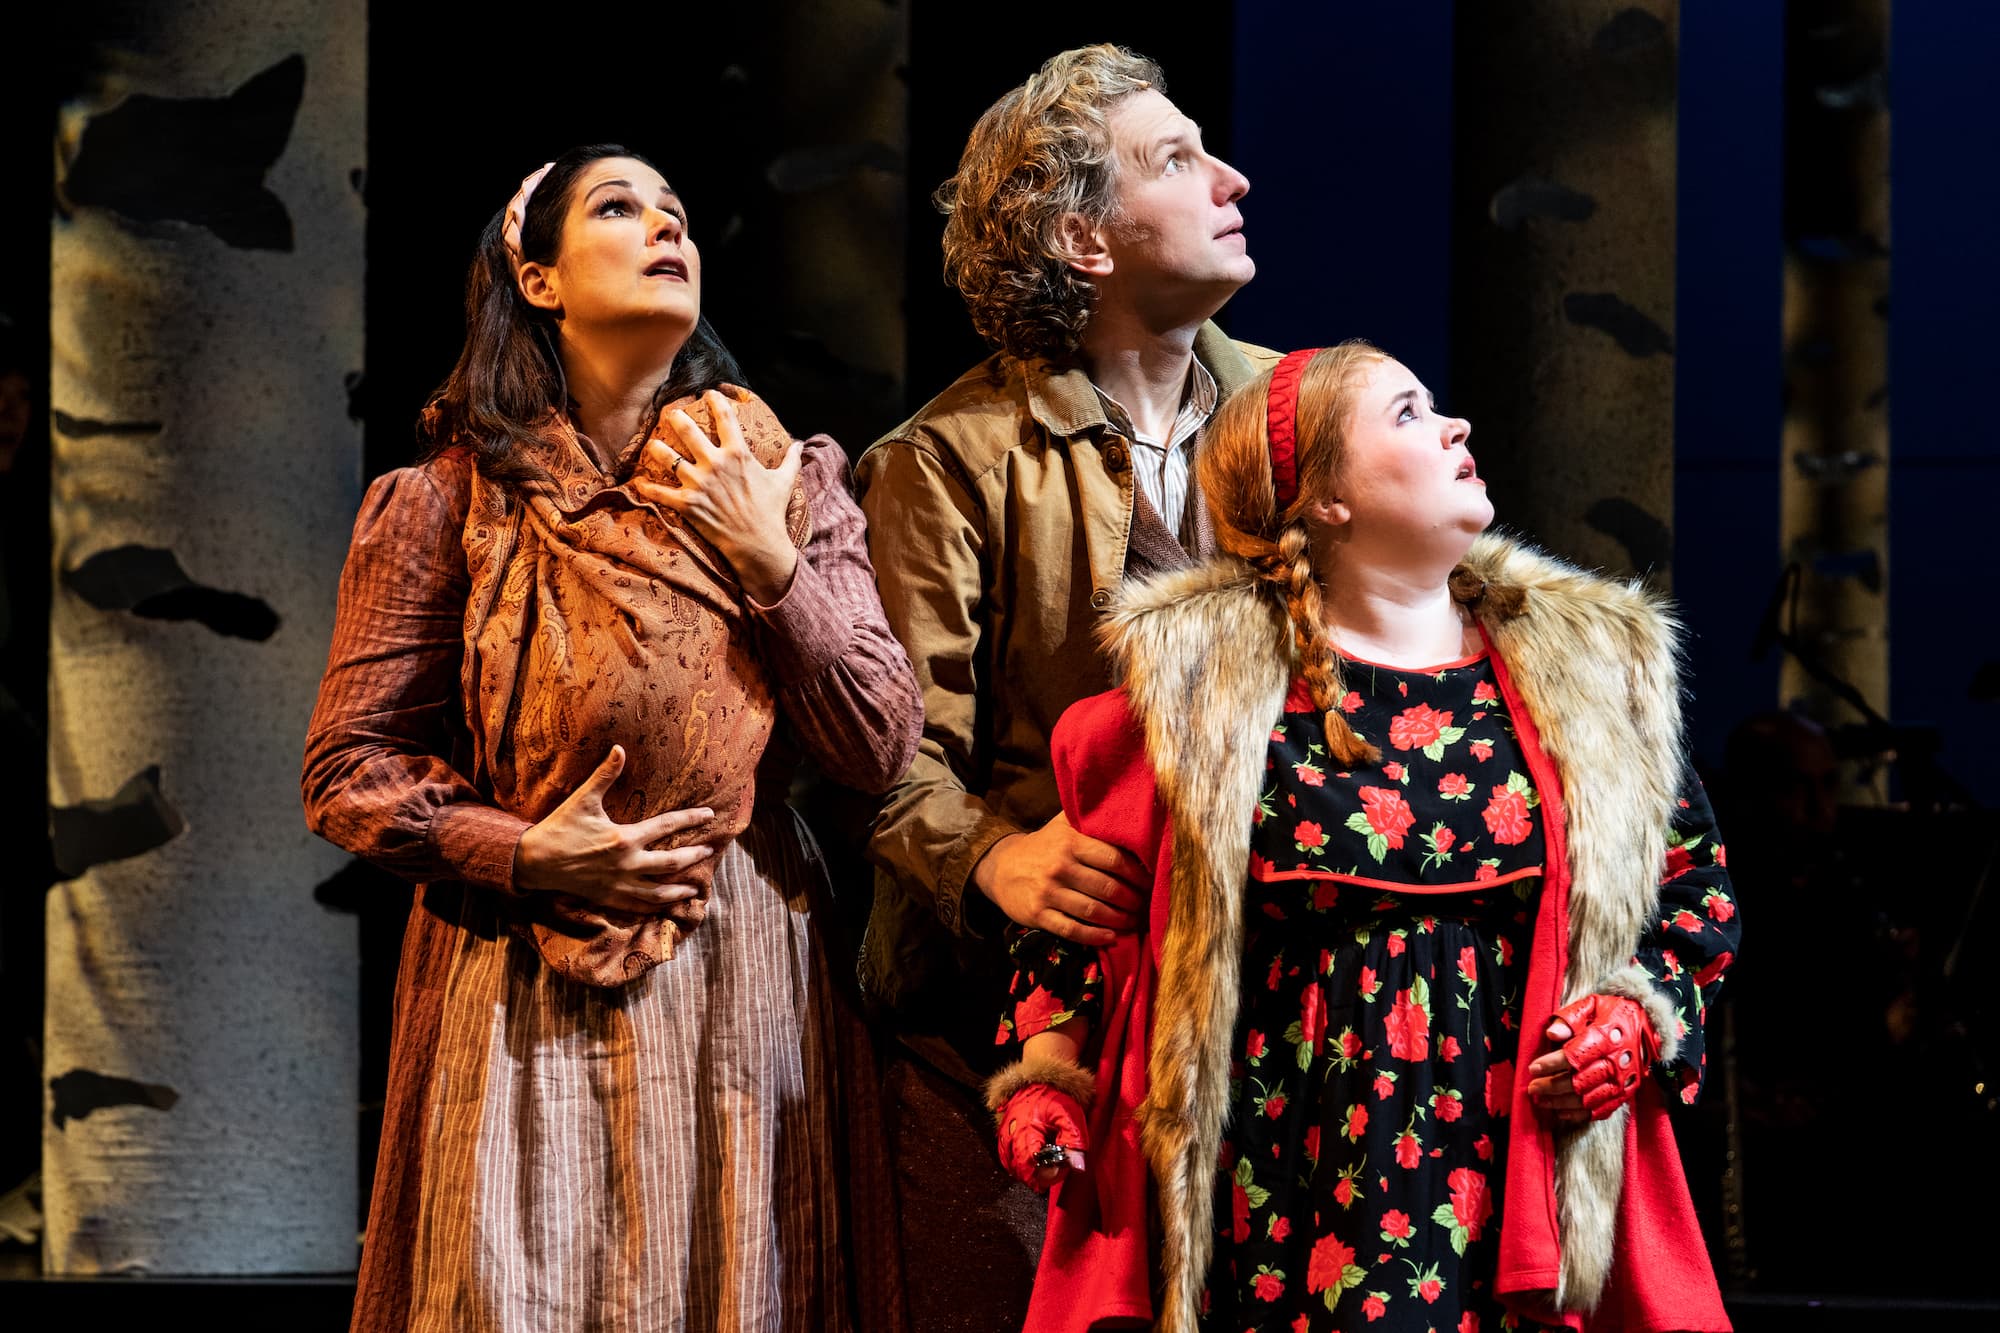 Stephanie J. Block (Baker's Wife),Sebastian Arcelus (Baker) and Katy Geraghty (Little Red Riding Hood) in &quot;Into the Woods&quot; at the Emerson Colonial Theatre. (Courtesy Matthew Murphy and Evan Zimmerman for MurphyMade)